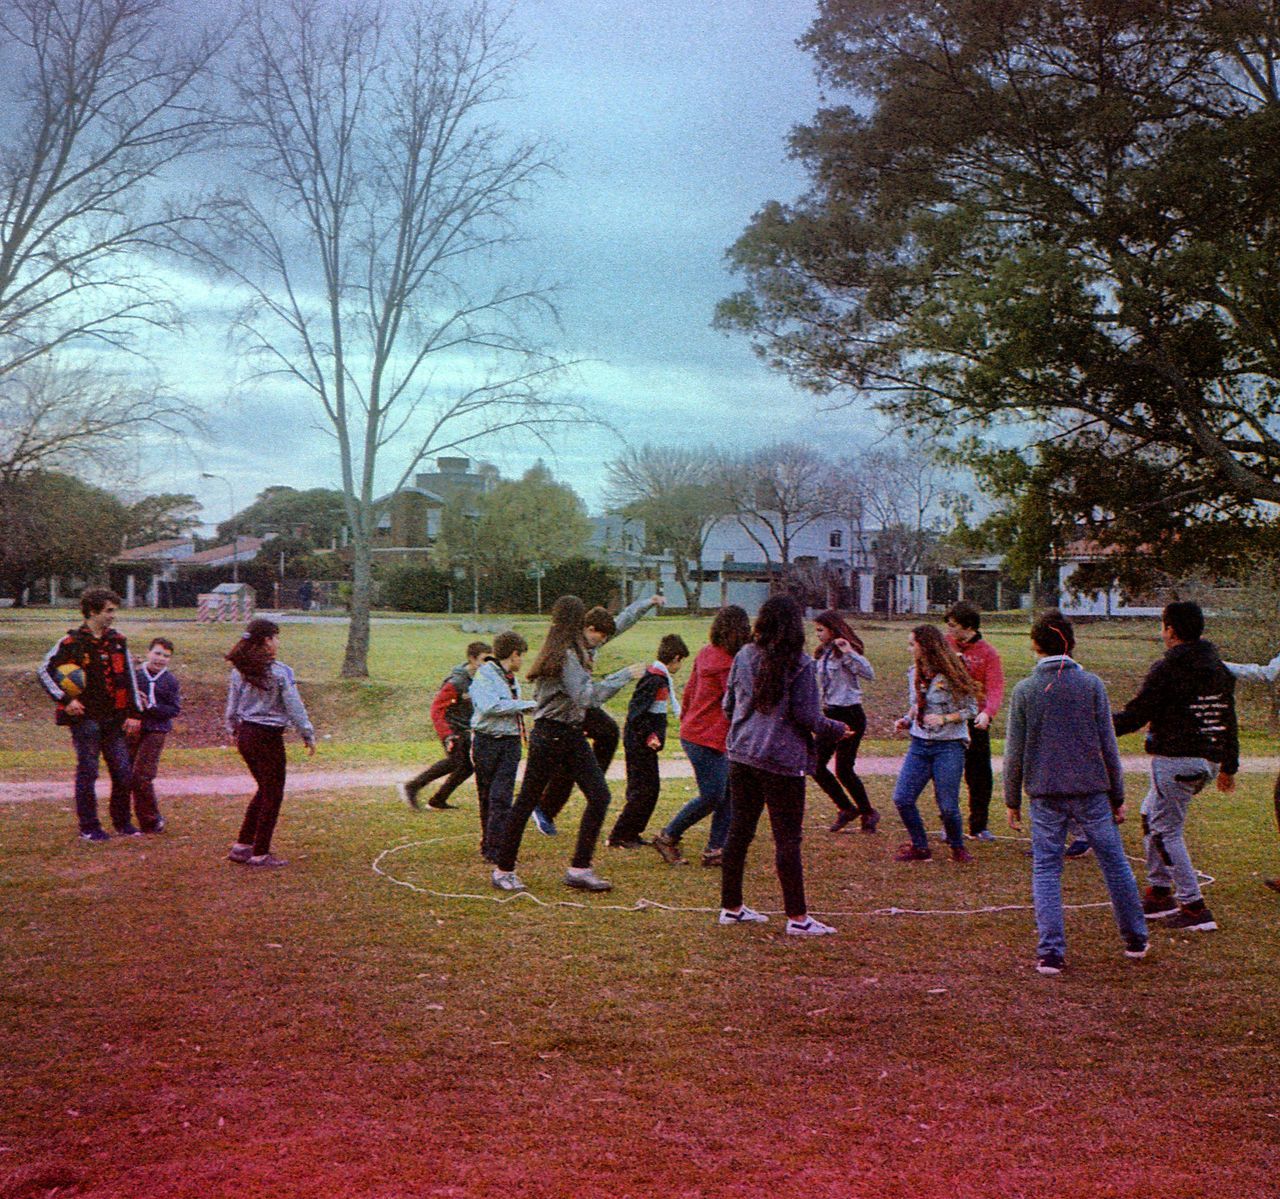 GROUP OF PEOPLE ON FIELD BY TREES